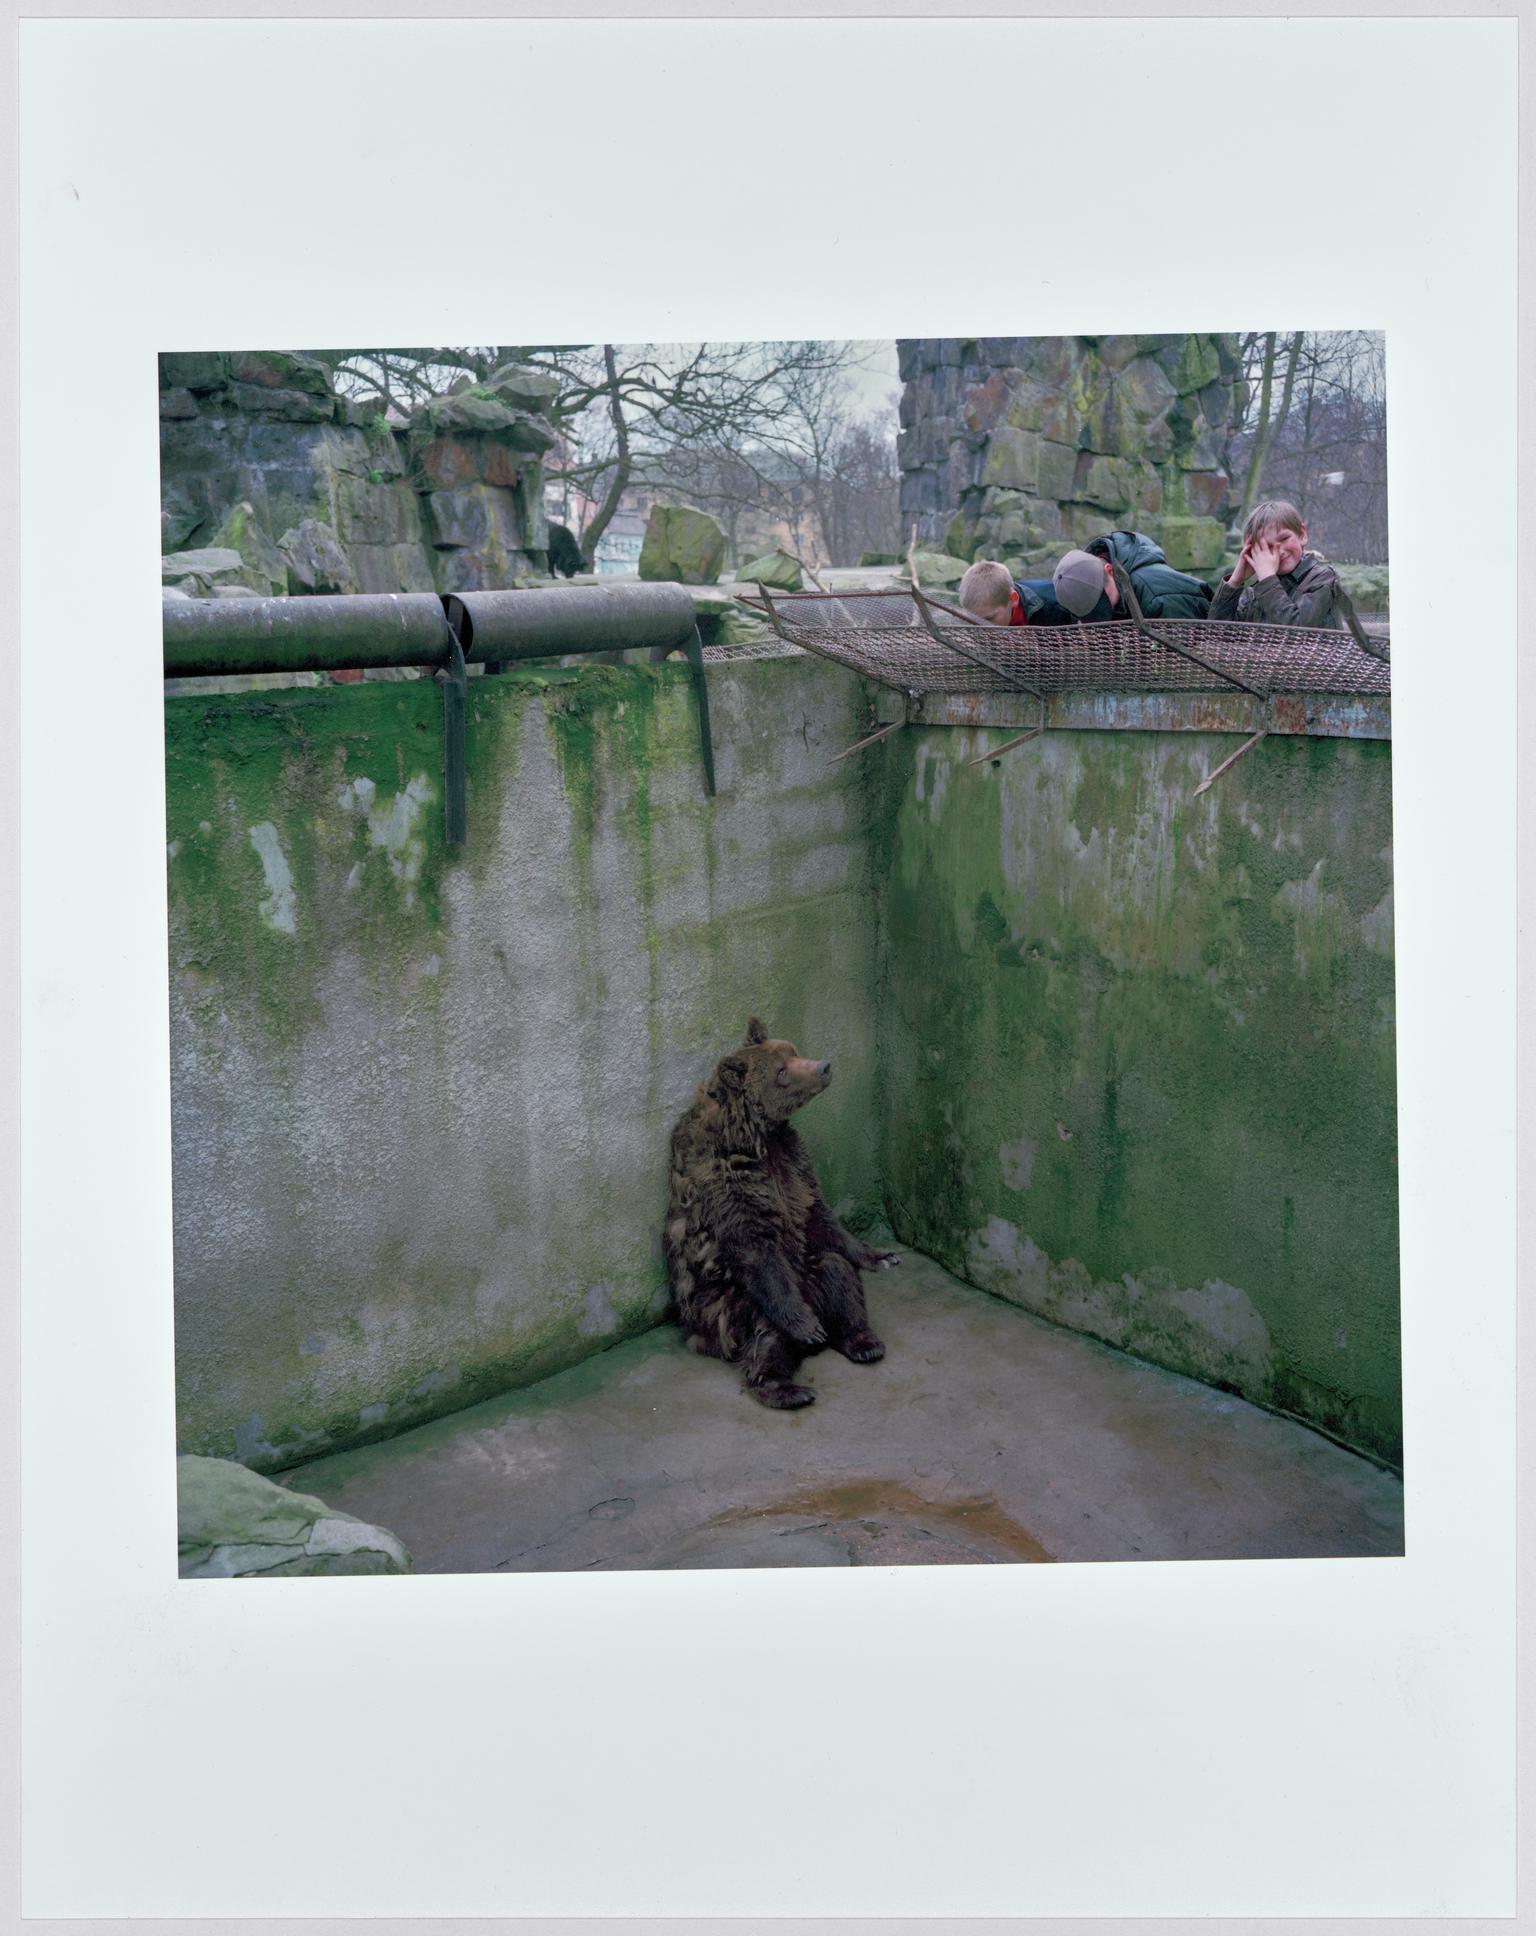 A bear sits alone in a pit in Kaliningrad Zoo, Russia